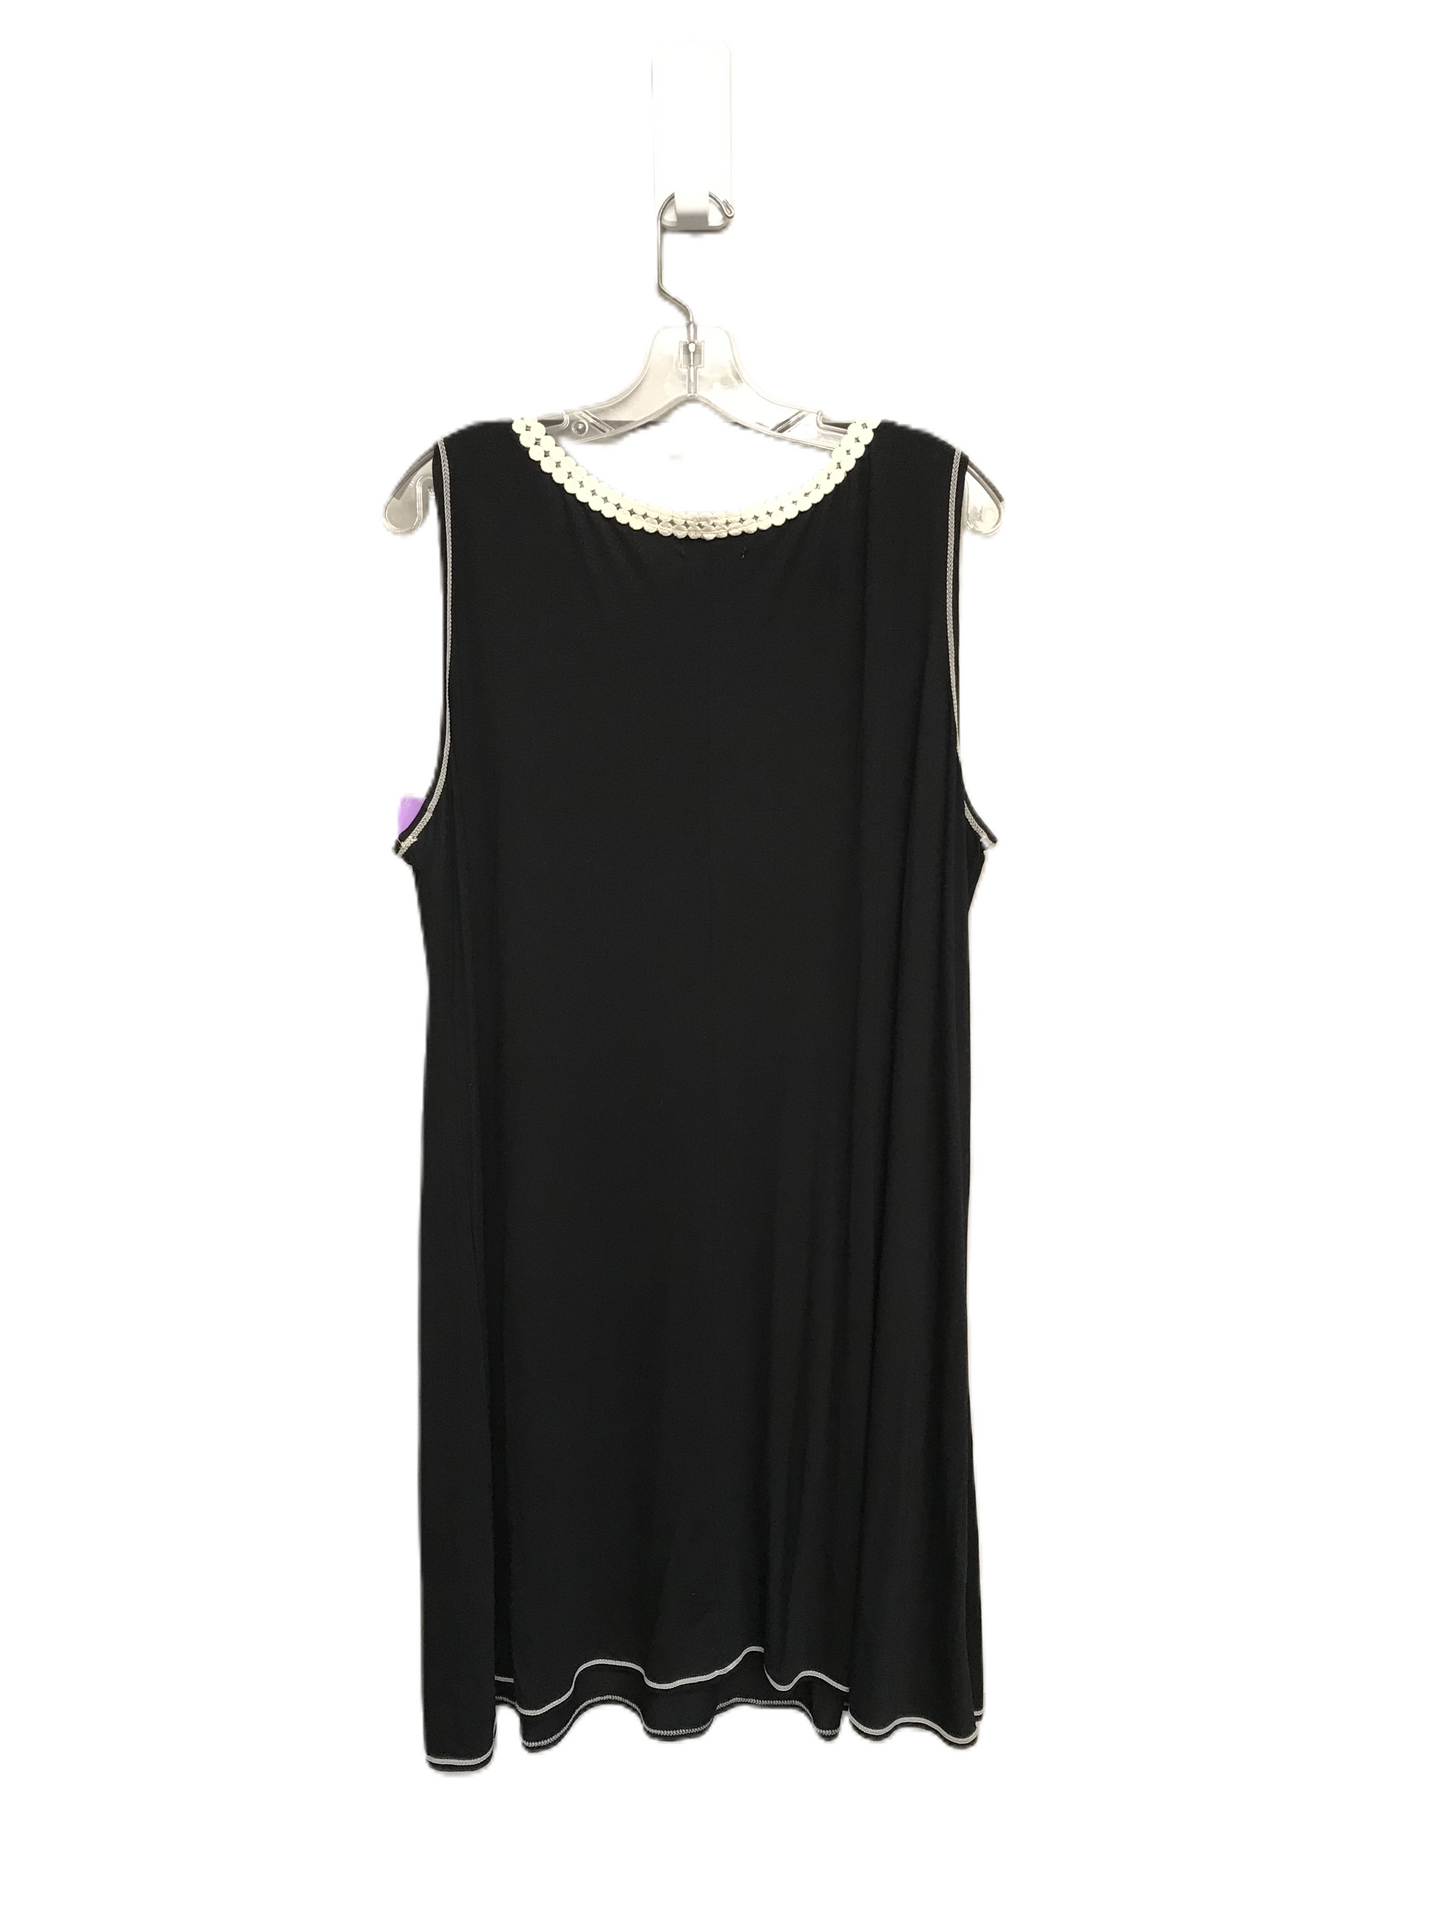 Black Dress Casual Short By Max Studio, Size: 1x